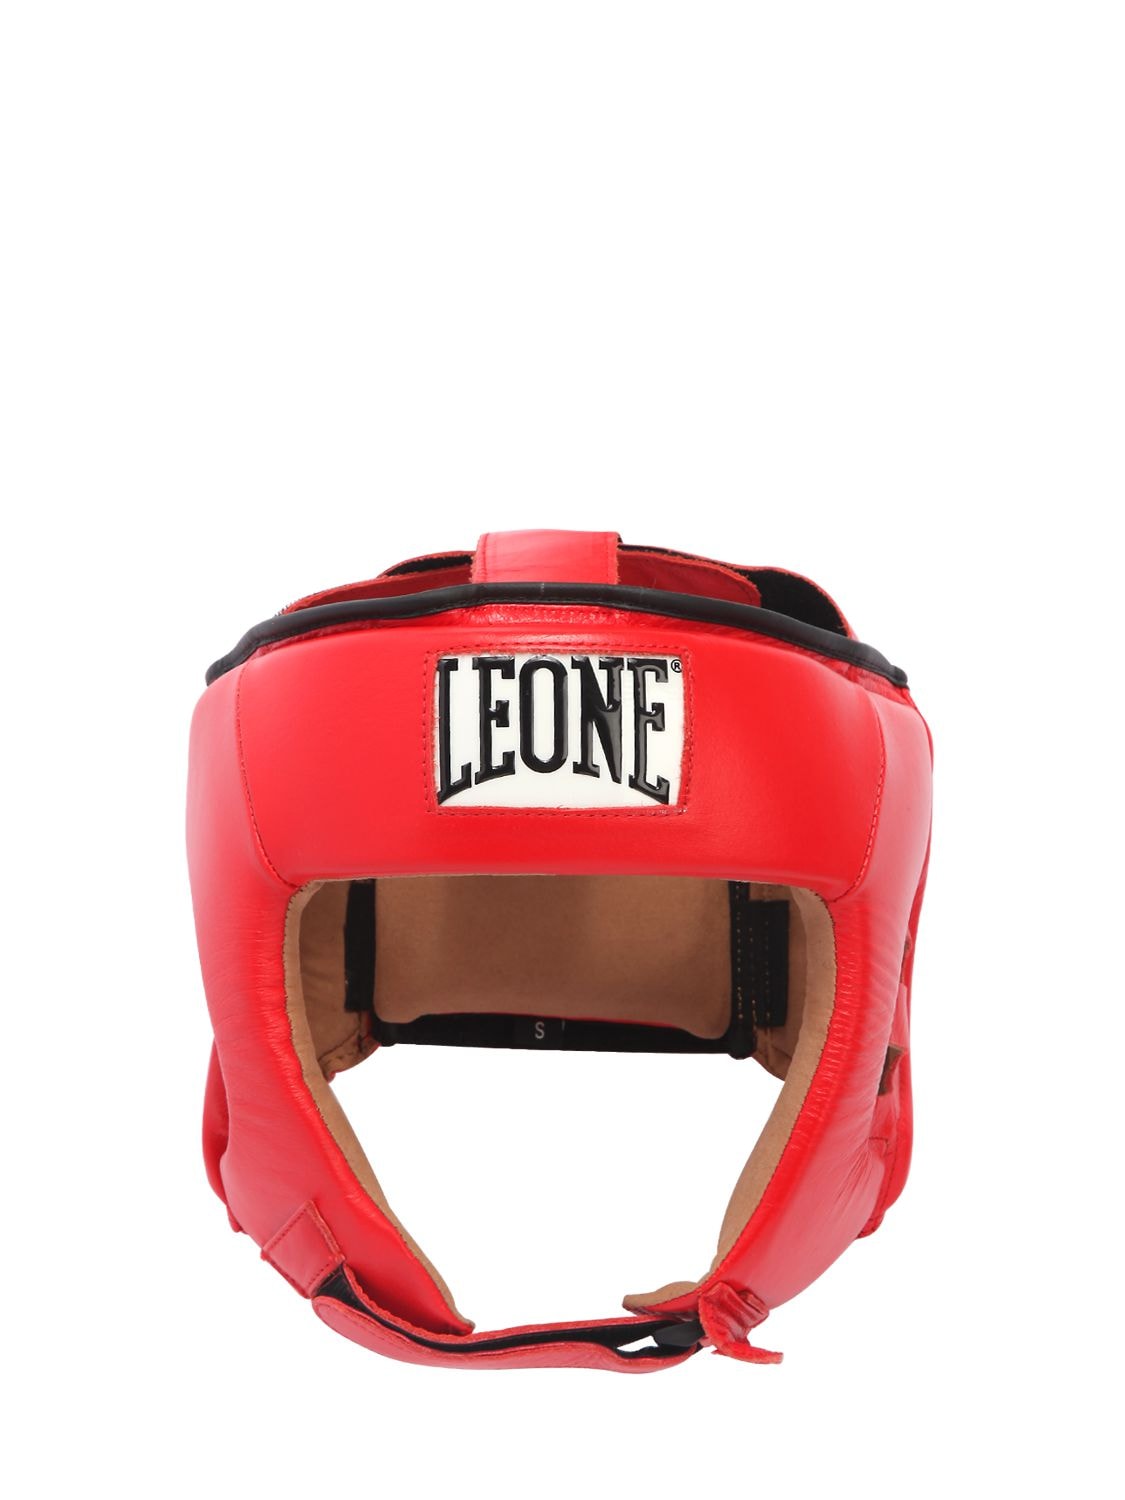 Leone Contest Leather Boxing Helmet In Red